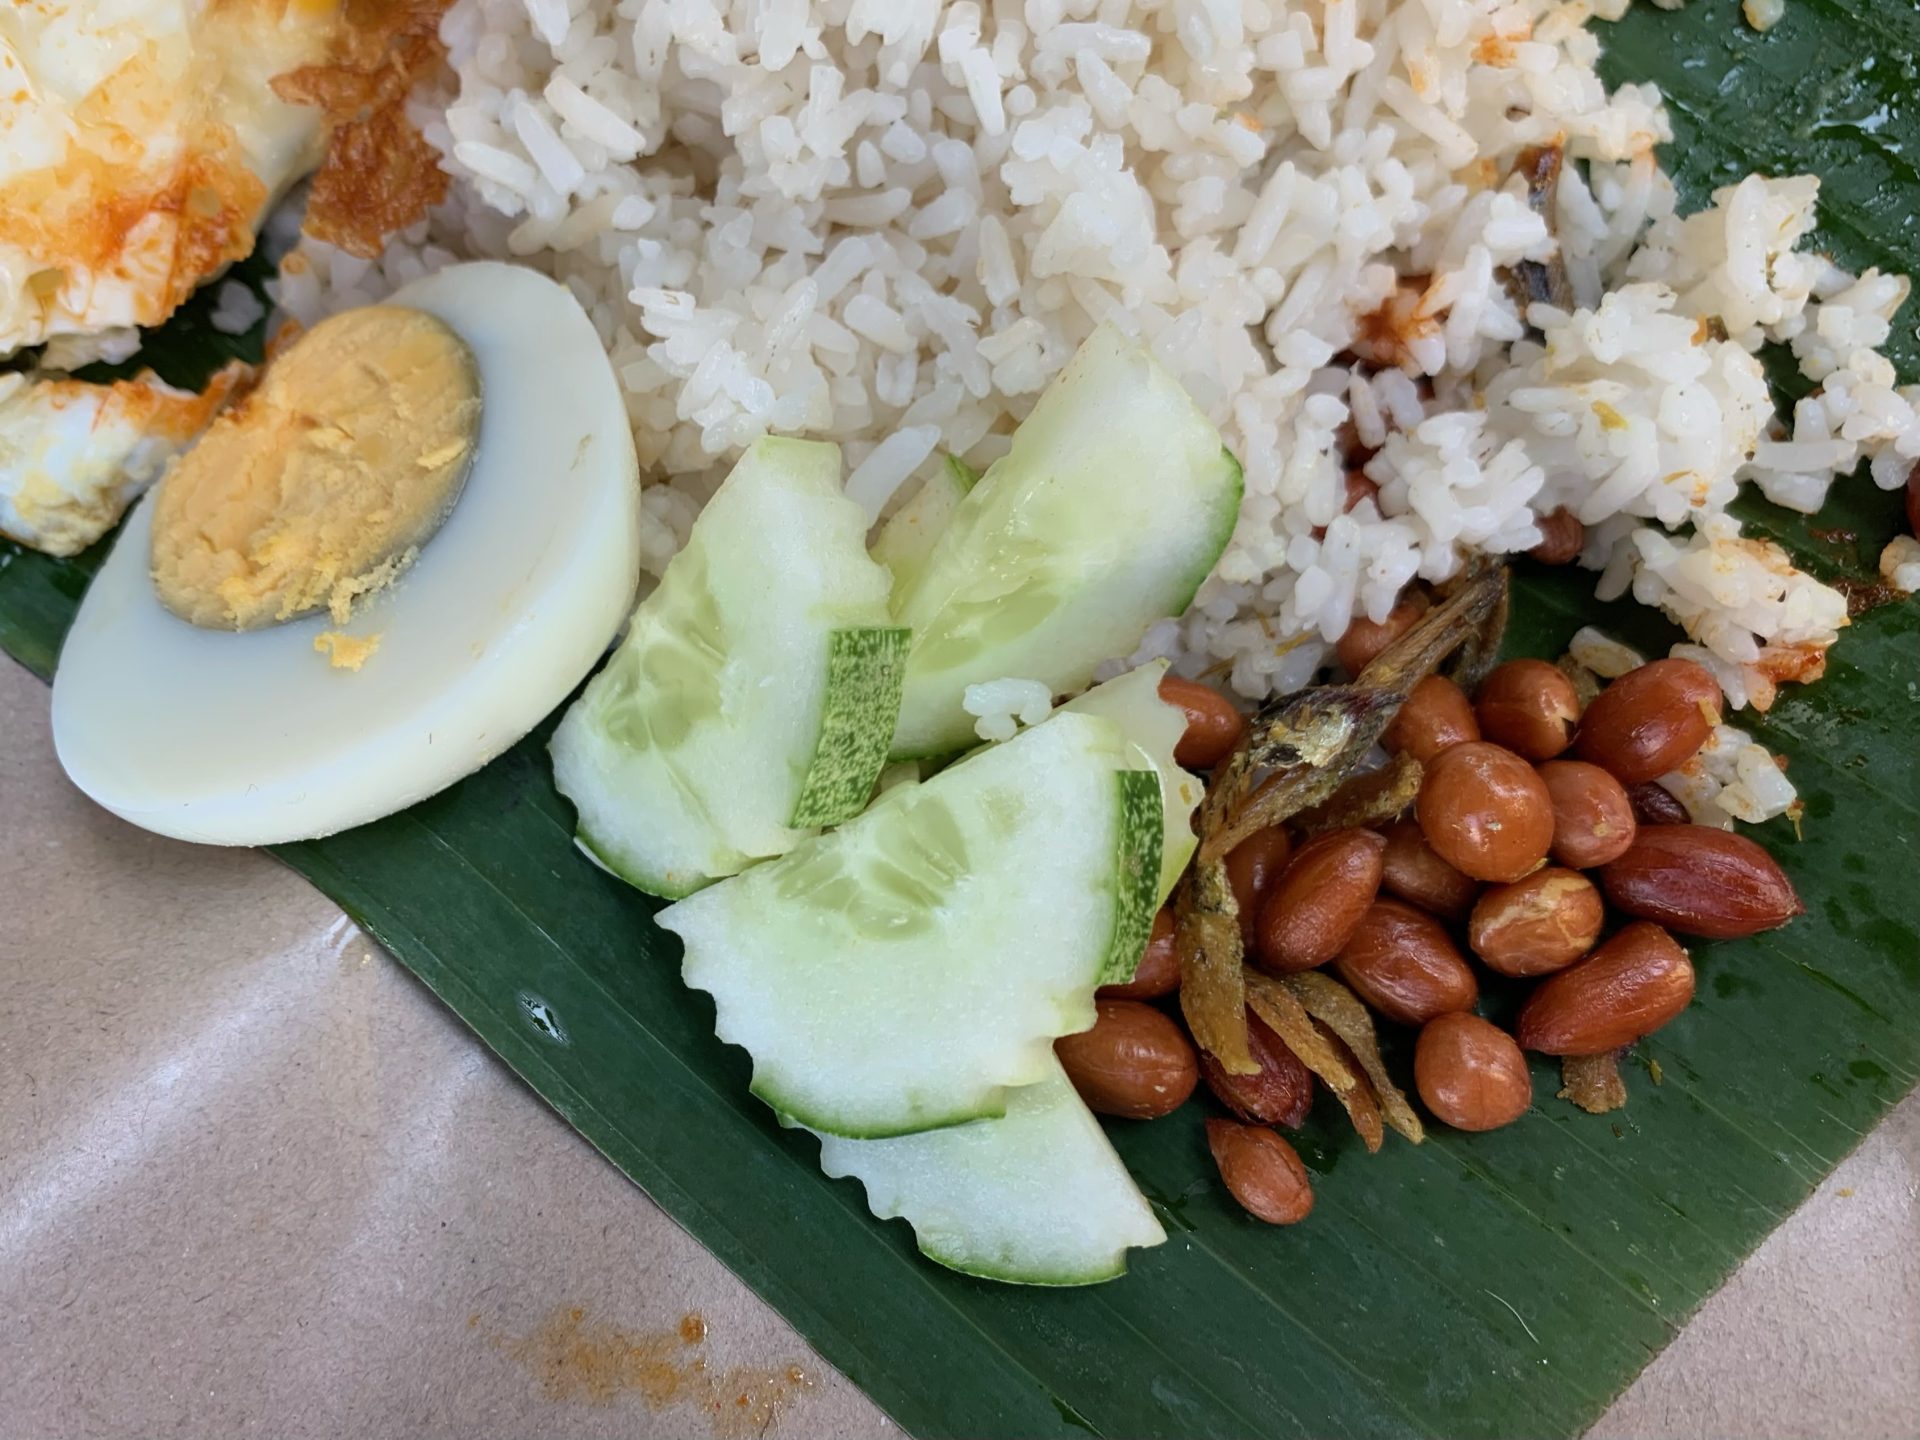 Nasi Lemak Alor Corner - Half boiled egg, cucumber, fried peanuts, and fried anchovies